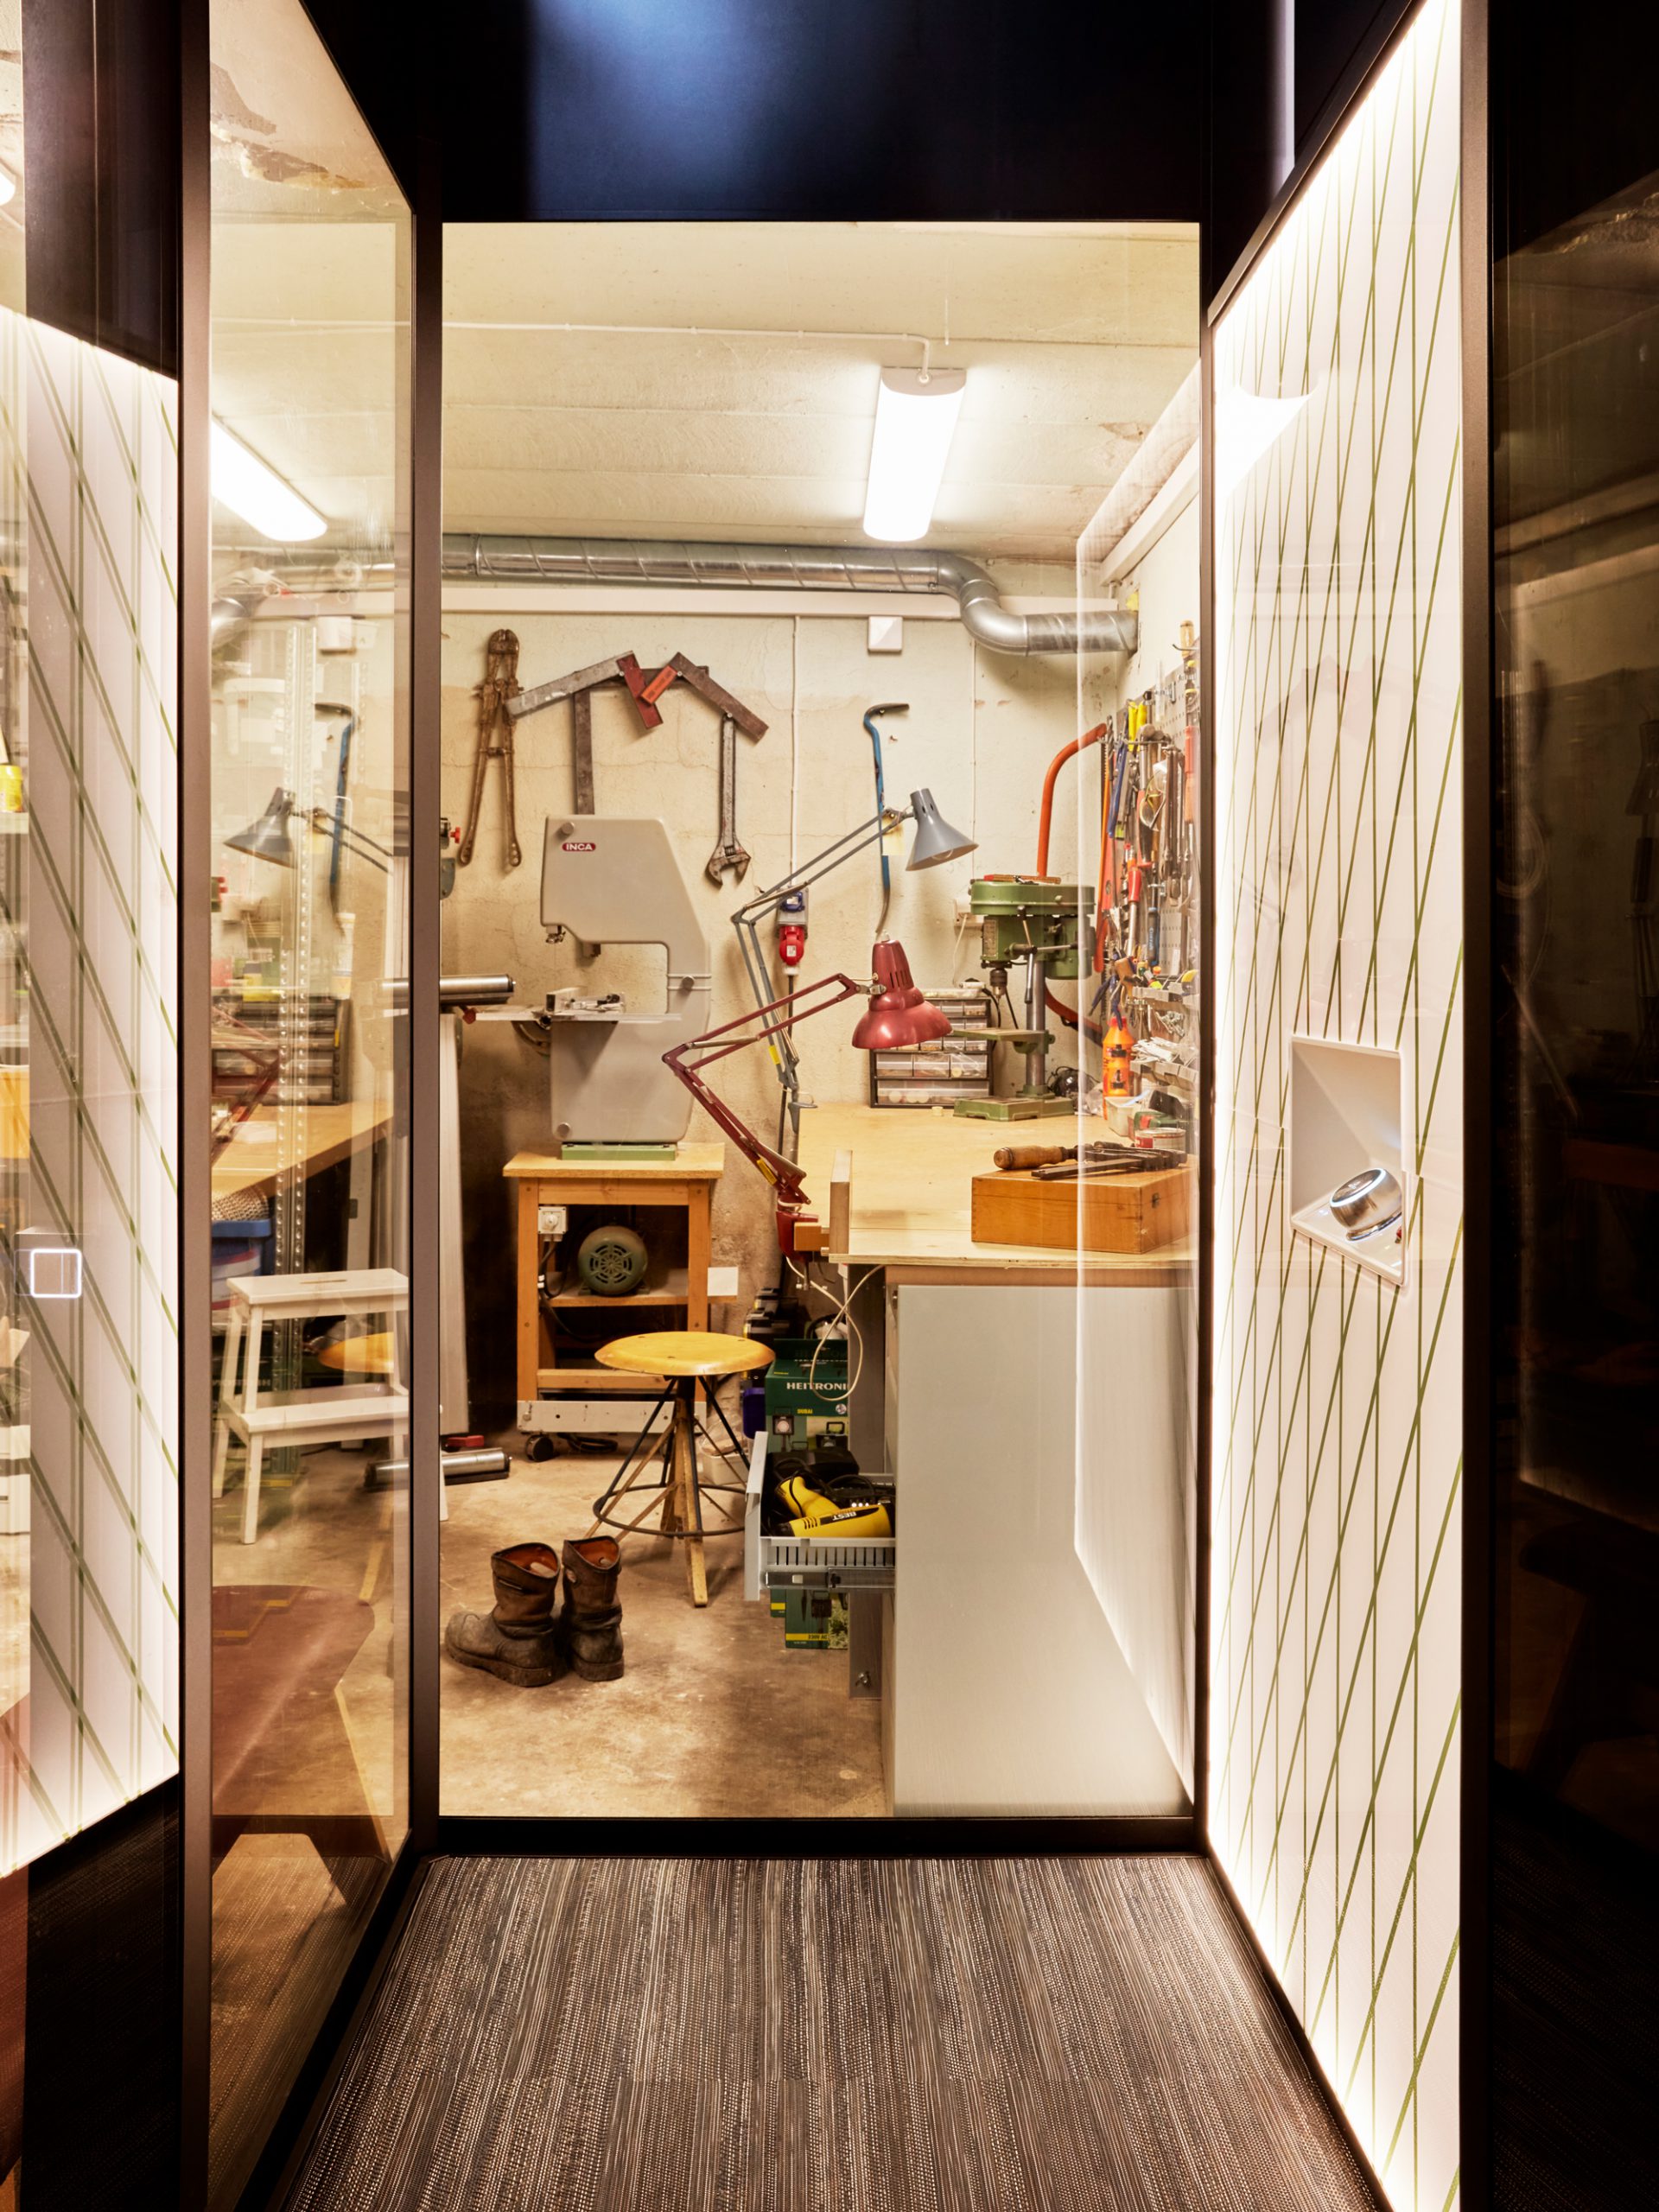 View from a homelift to to the workshop in the home of designer Alexander Lervik